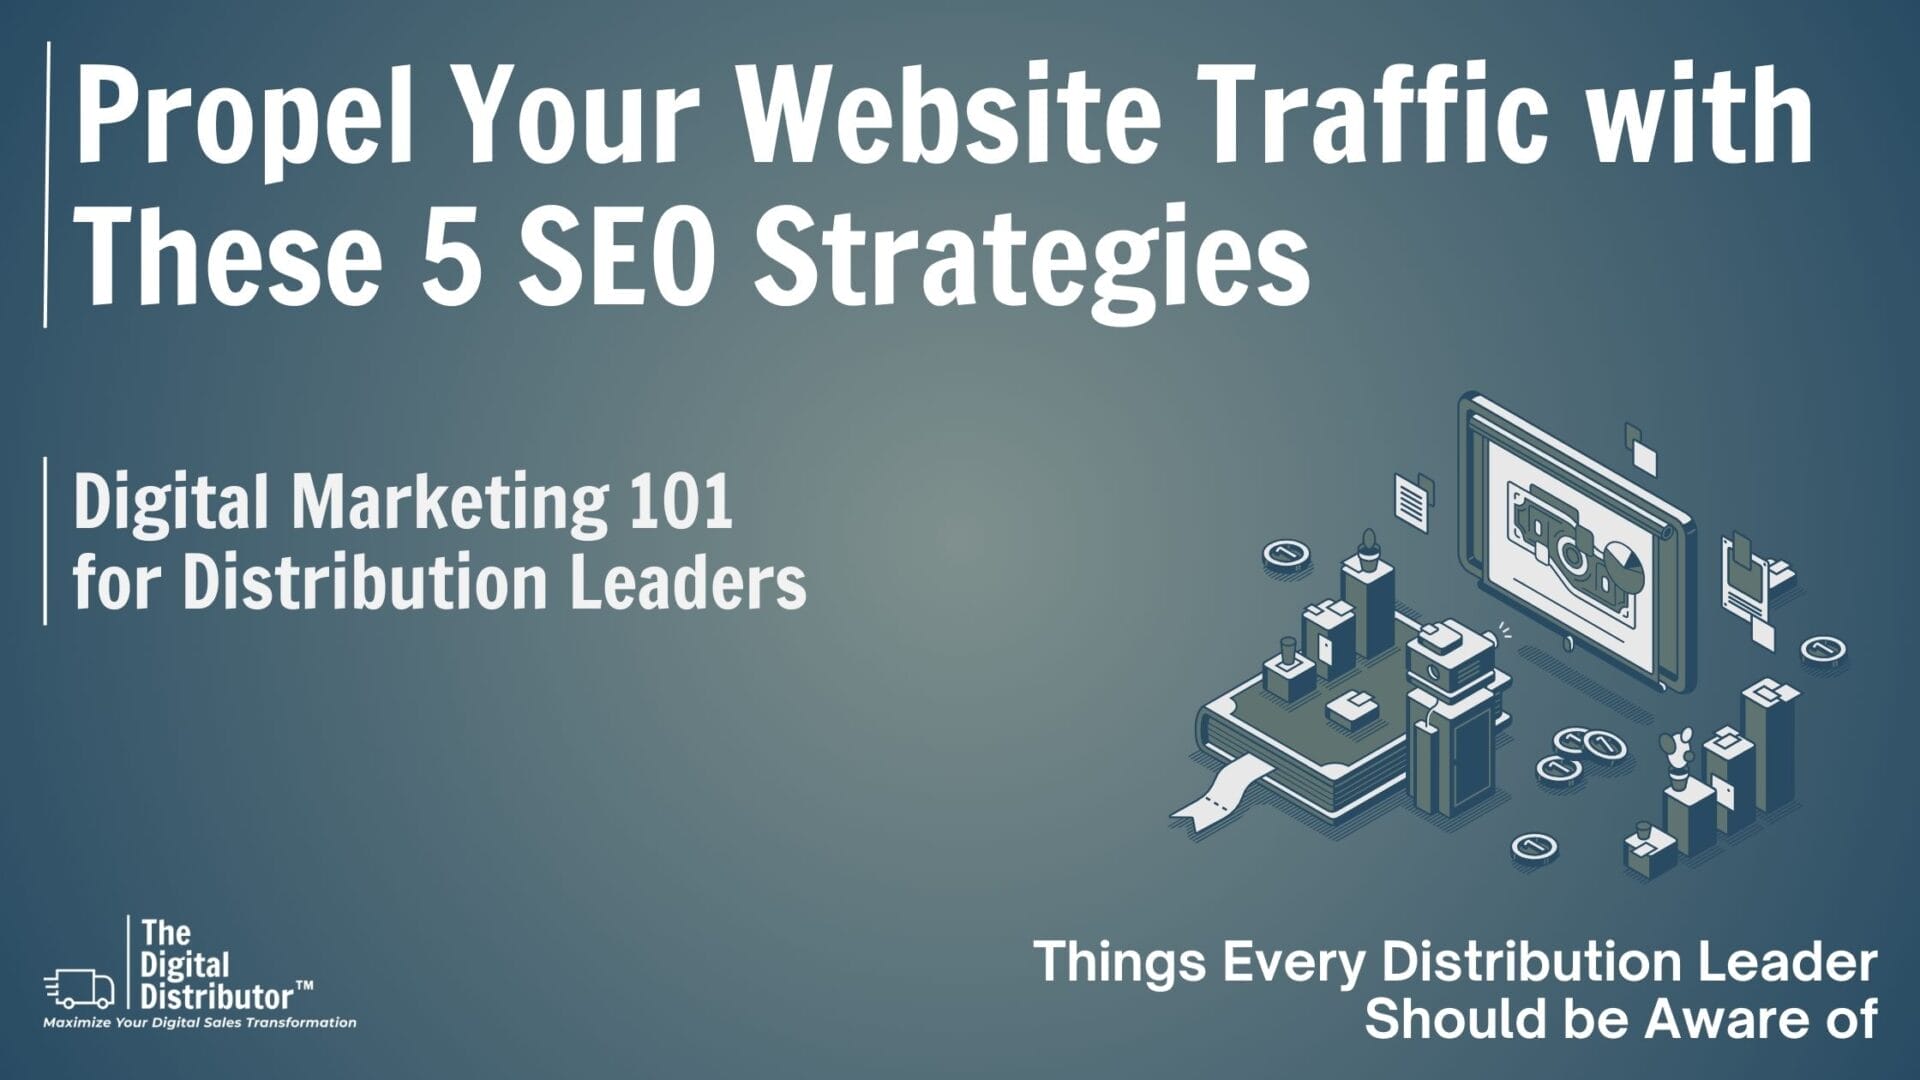 Propel Your Website Traffic With These 5 SEO Strategies